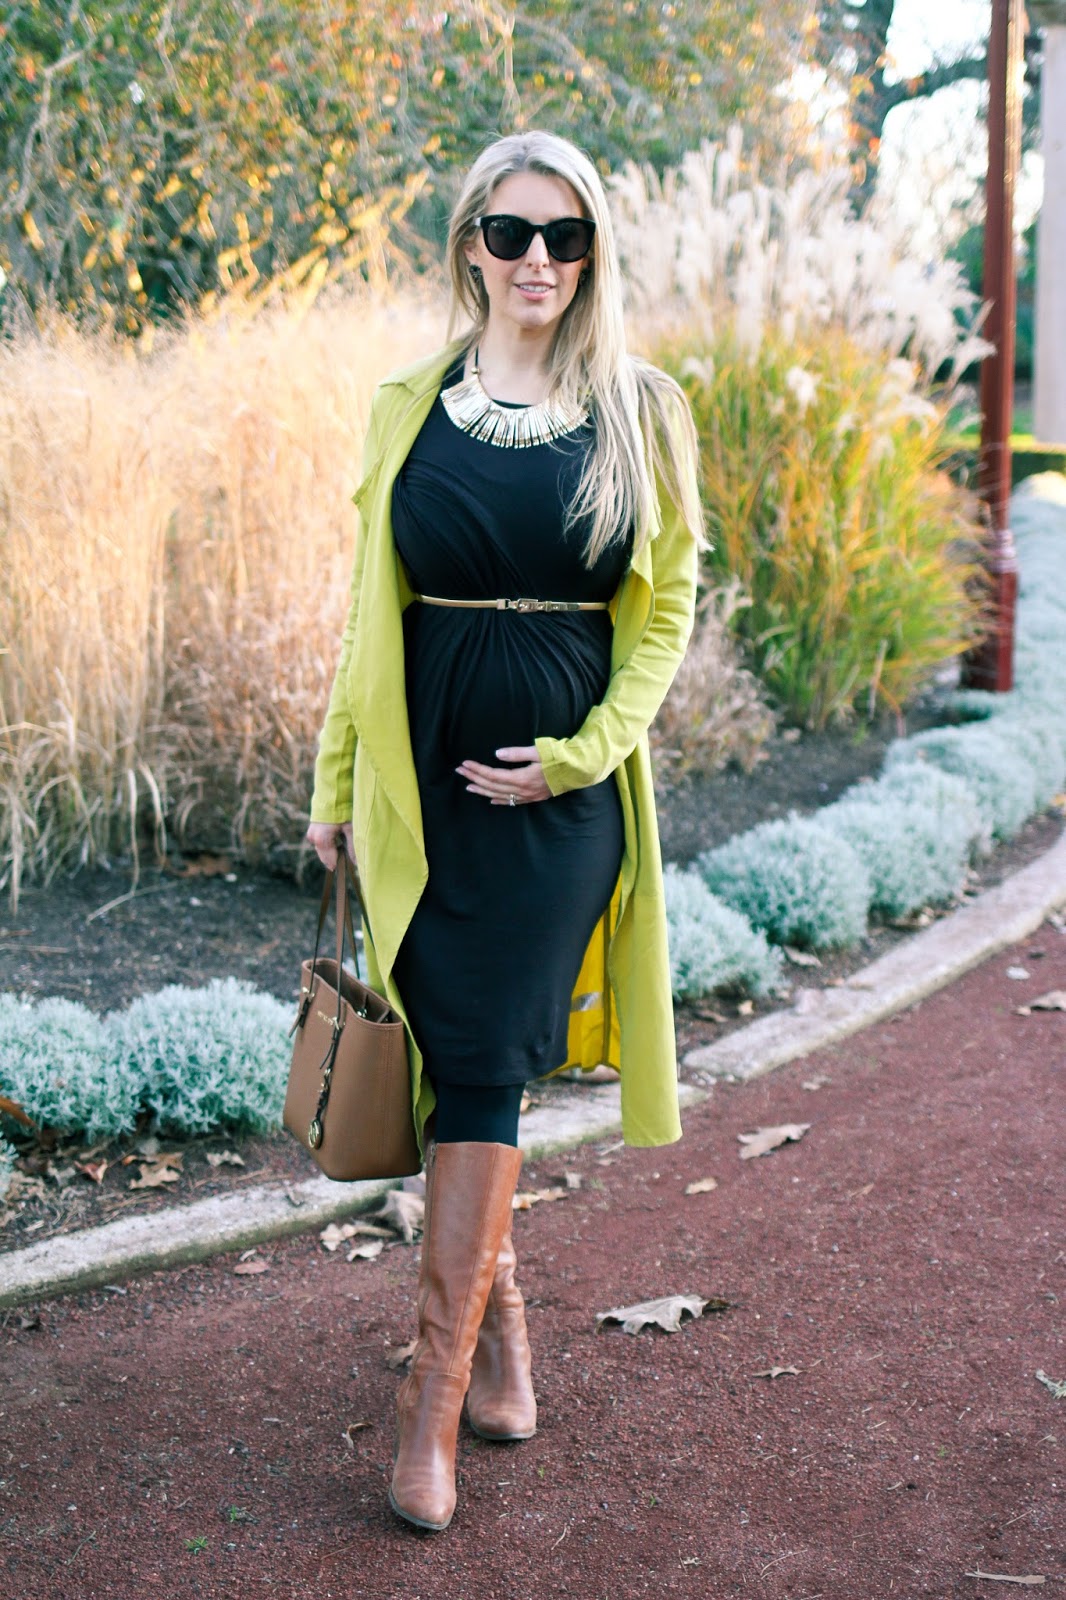 The Goldfields Girl styling maternity fashion. She wears black maternity dress, green jacket, statement gold necklace, brown boots and Michael Kors bag.